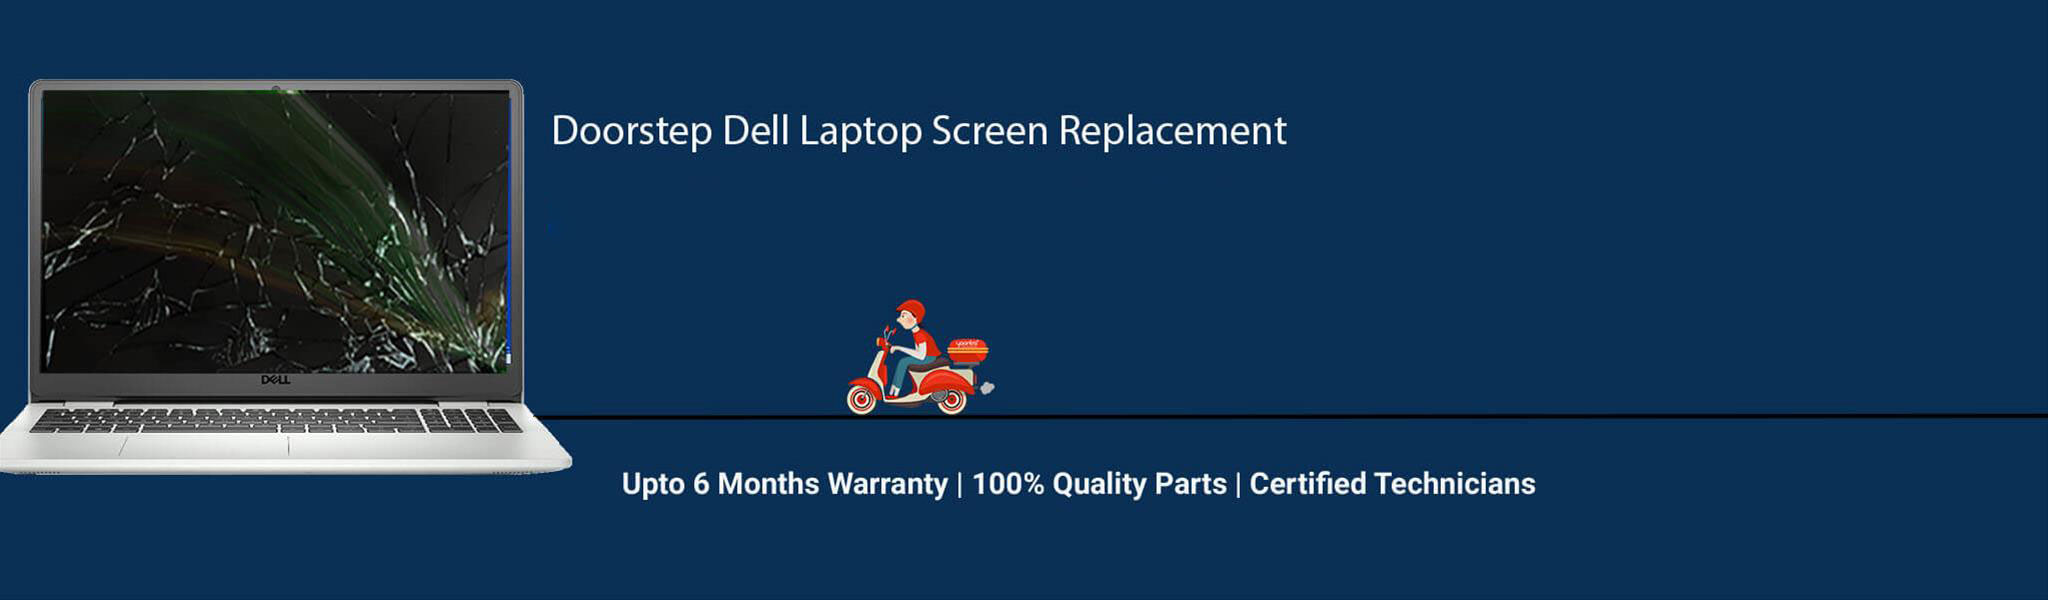 dell-laptop-screen-replacement.jpg